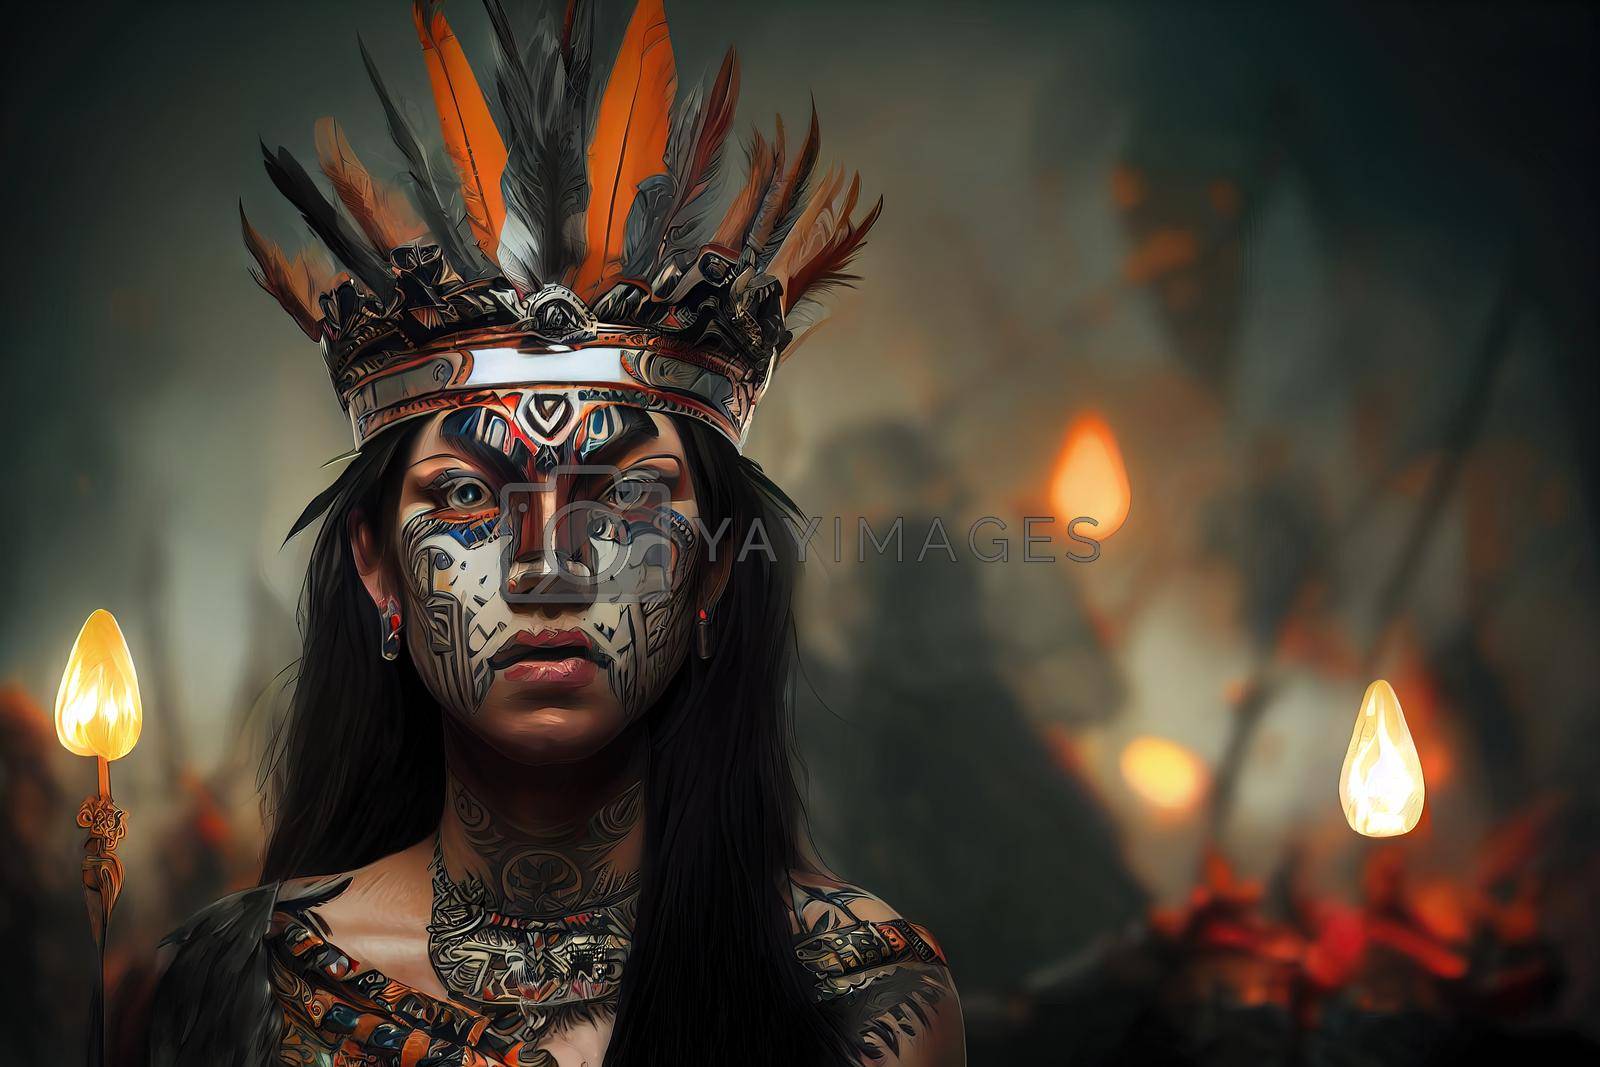 Royalty free image of 3d illustration of aztec woman warrior with crown of feathers by Farcas